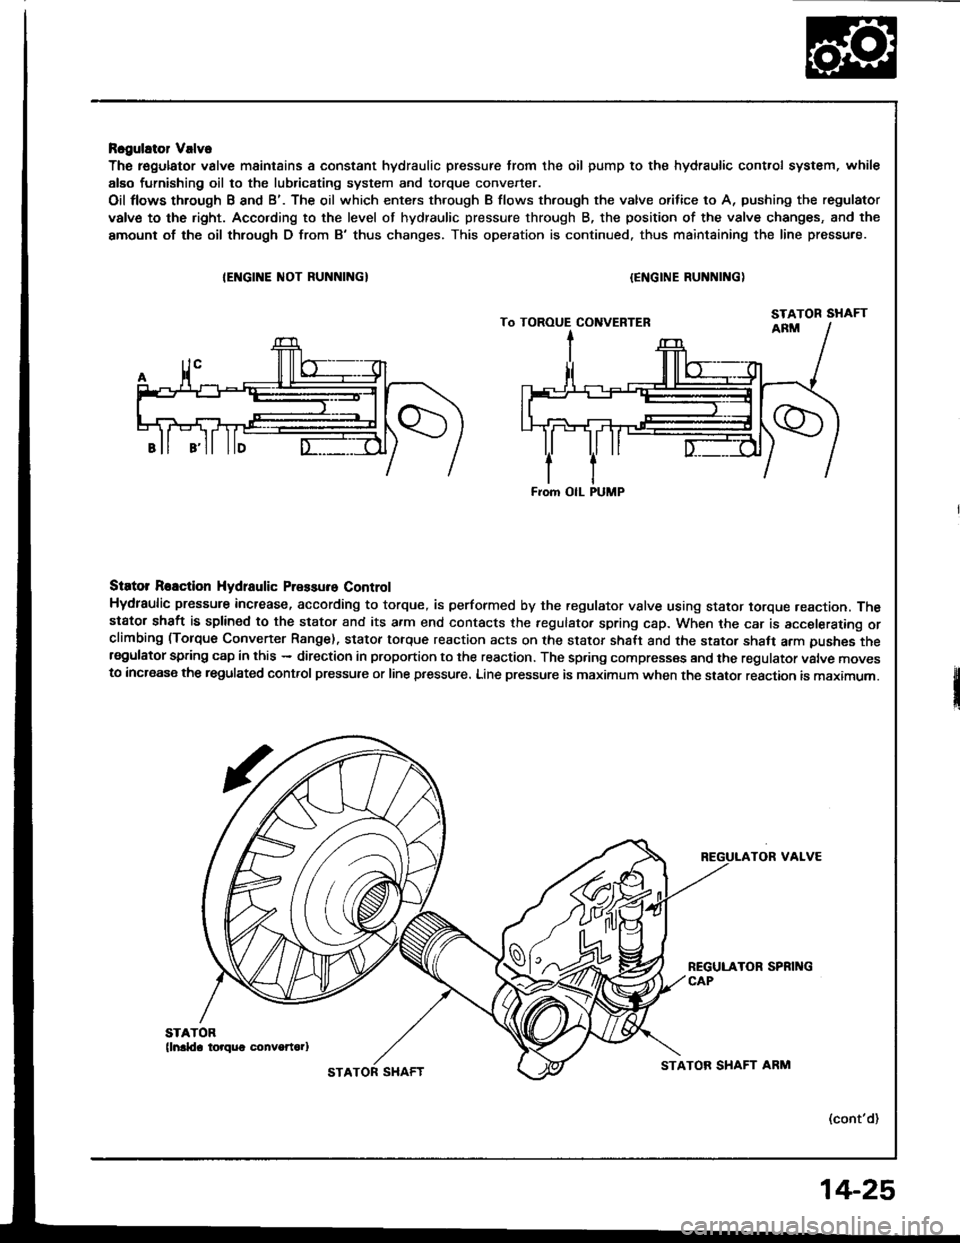 ACURA INTEGRA 1994  Service Repair Manual Rcgulator Valve
The r€gulator valve maintains a constant hydraulic pressure from the oil pump to the hydraulic control system, whil€
alEo furnishing oil to the lubricating system and torque conven